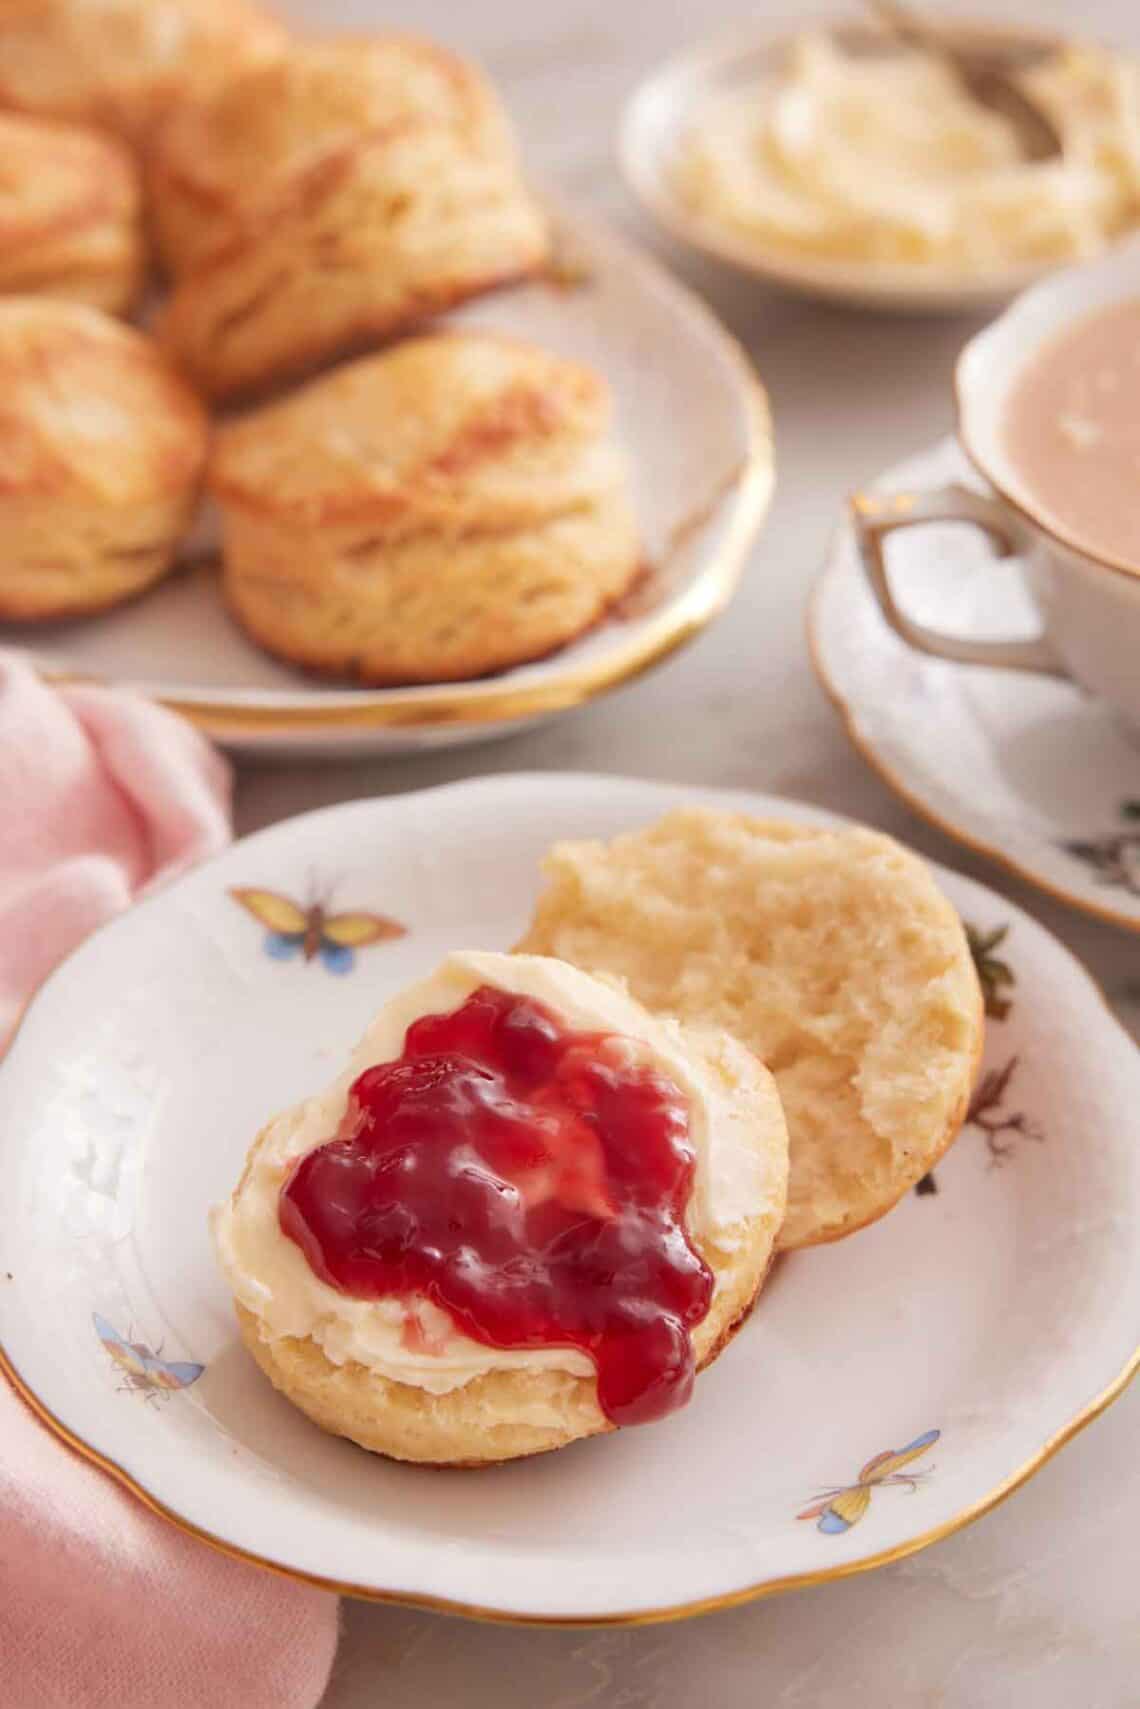 A plate with a buttermilk biscuit cut in half with butter and jam spread on top.